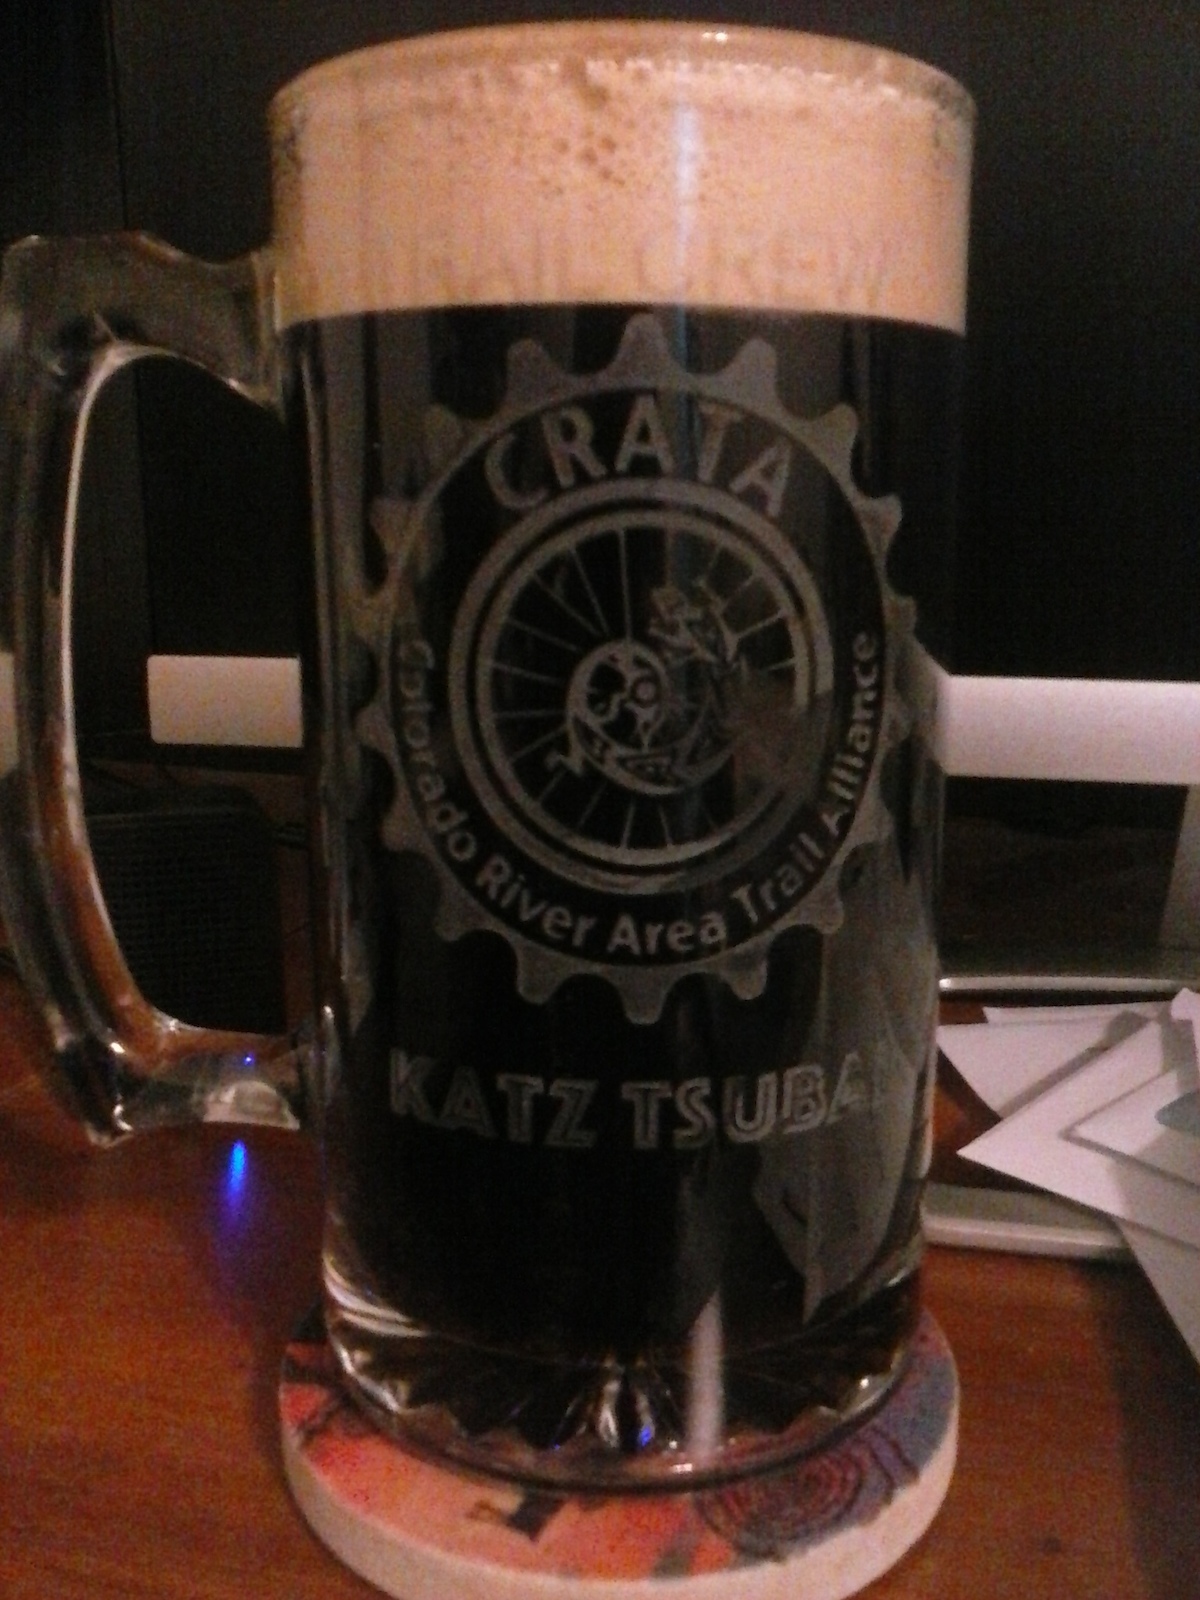 My personalized mug.  Thanks Scott and Denise.  Cheers, Ed, Joe, and Allen!